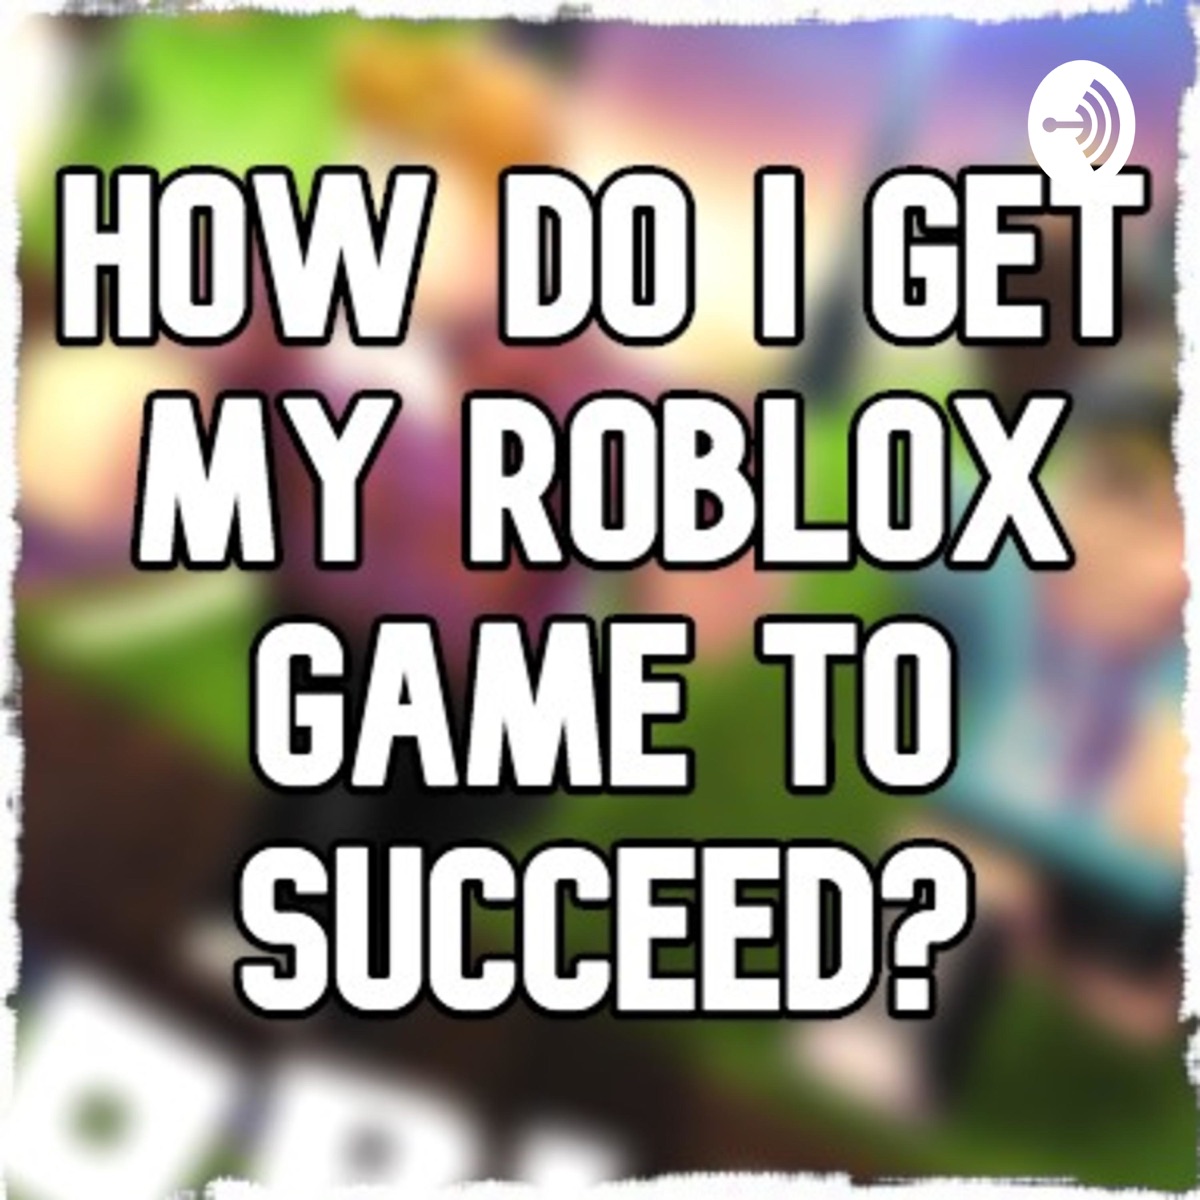 Related How Do I Make My Roblox Game Succeed Podcast Podtail - roblox woody got wood roblox id